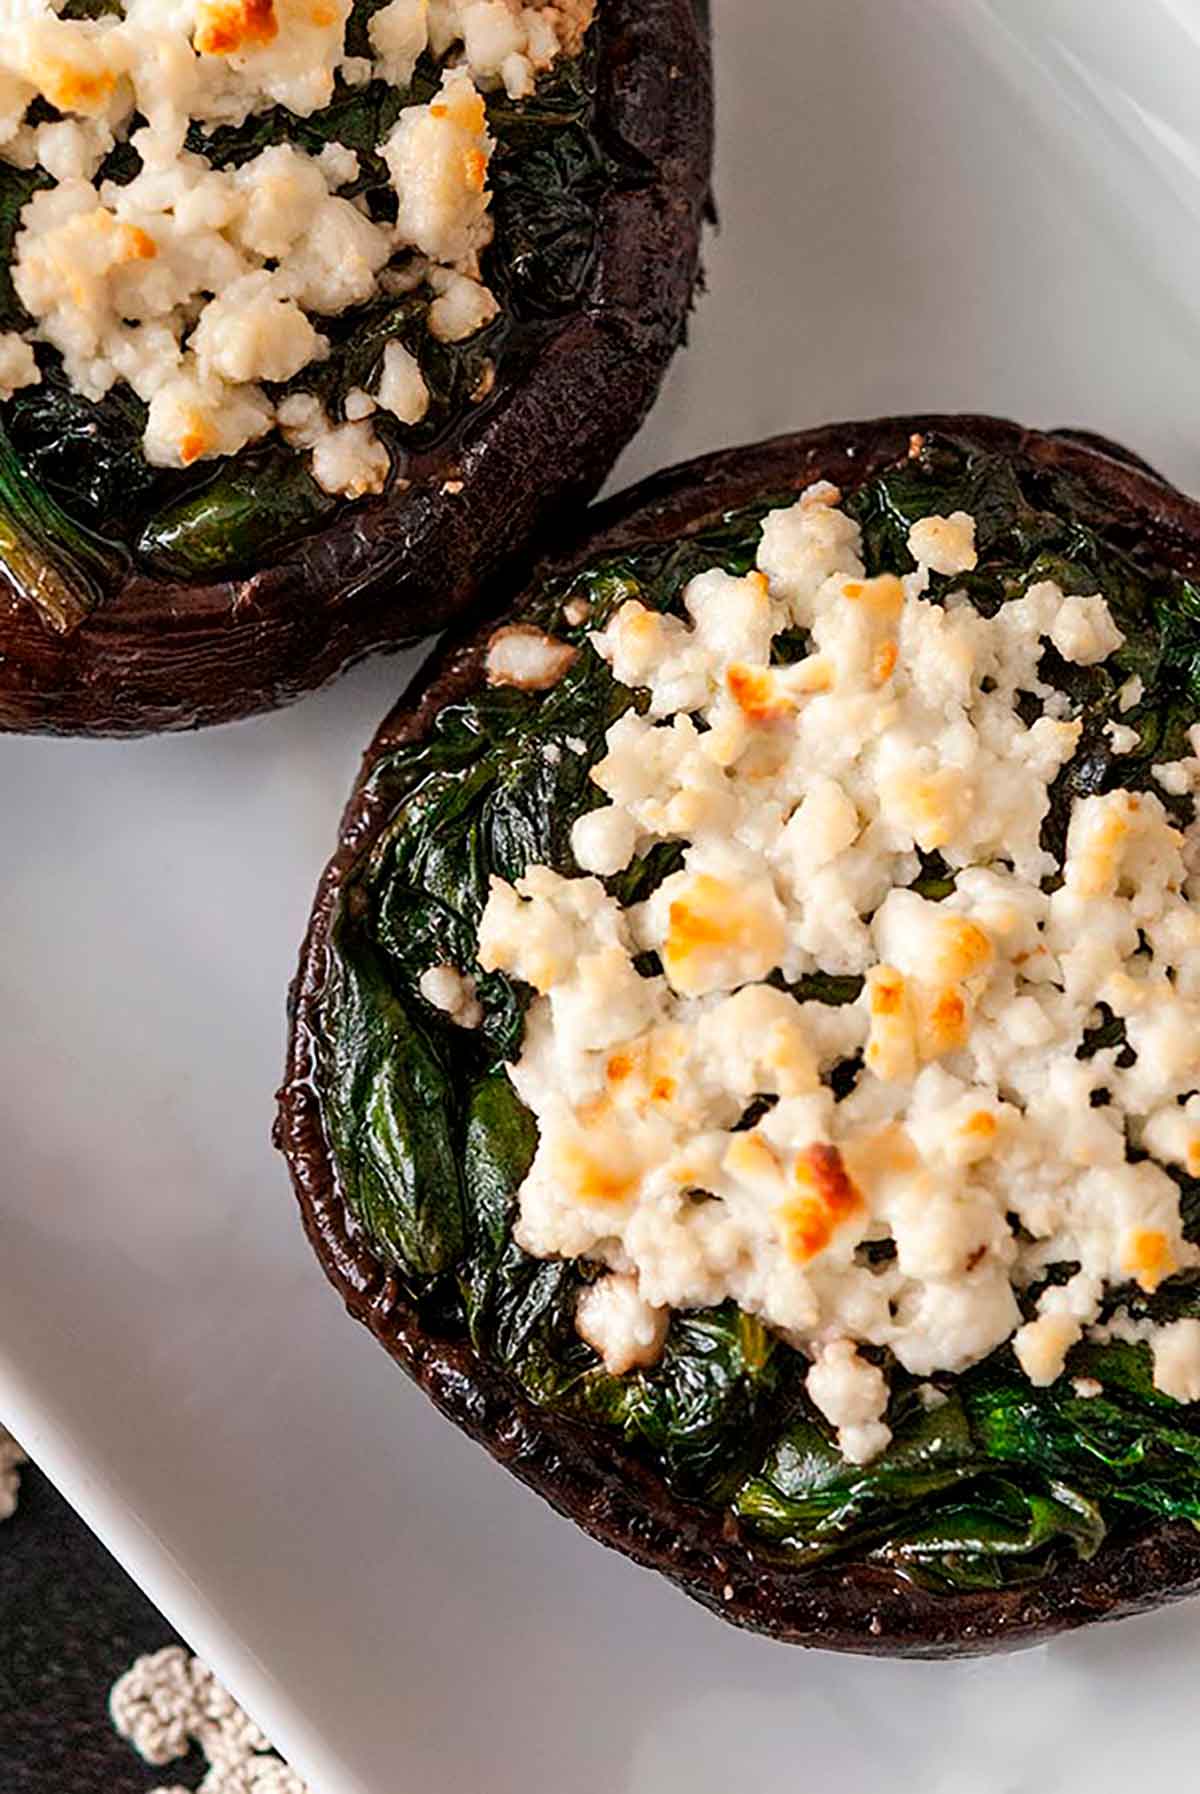 The top of 2 stuffed mushrooms with spinach and toasted feta on top, sitting on a plate.